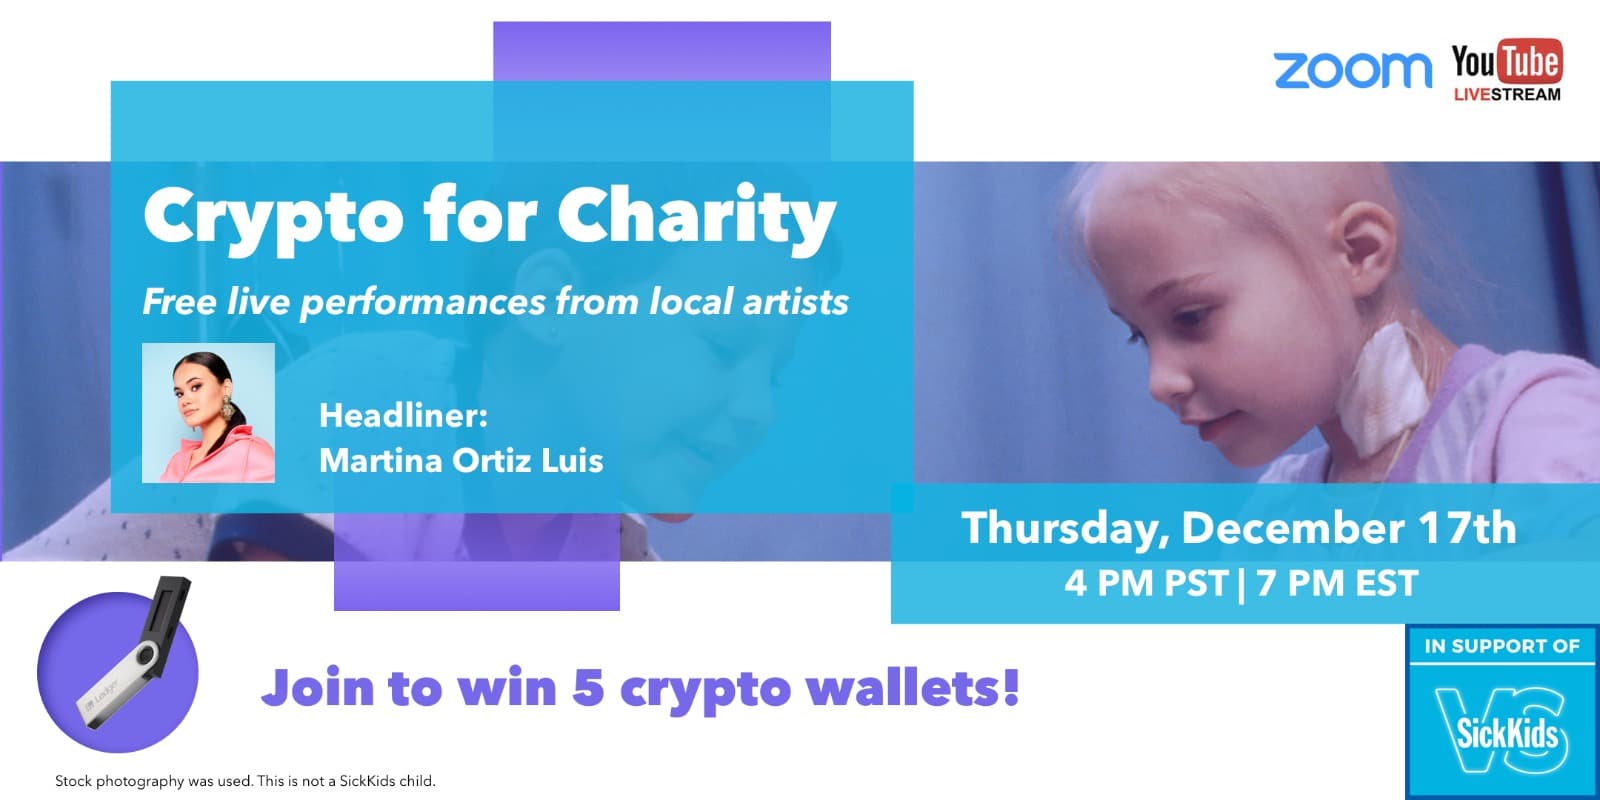 VirgoCX to Hold a Crypto Holiday Fundraiser in Support of SickKids Foundation